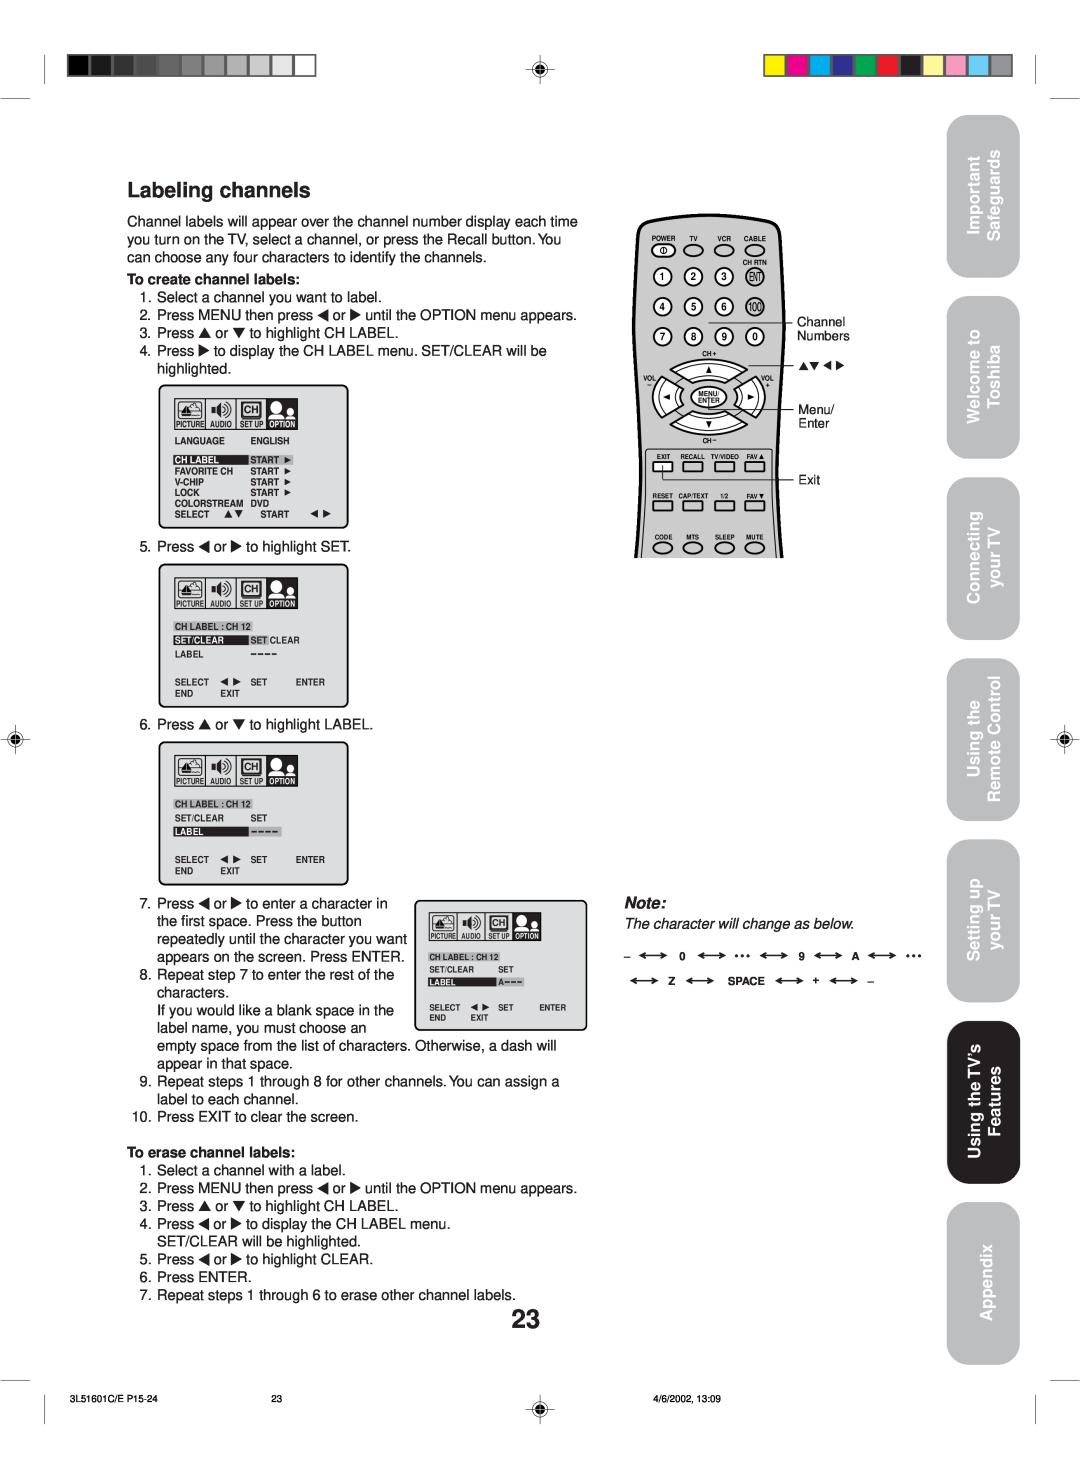 Toshiba TV 27A42 Labeling channels, Safeguards, Welcome to Toshiba Connecting your TV, Setting up your TV, Appendix 